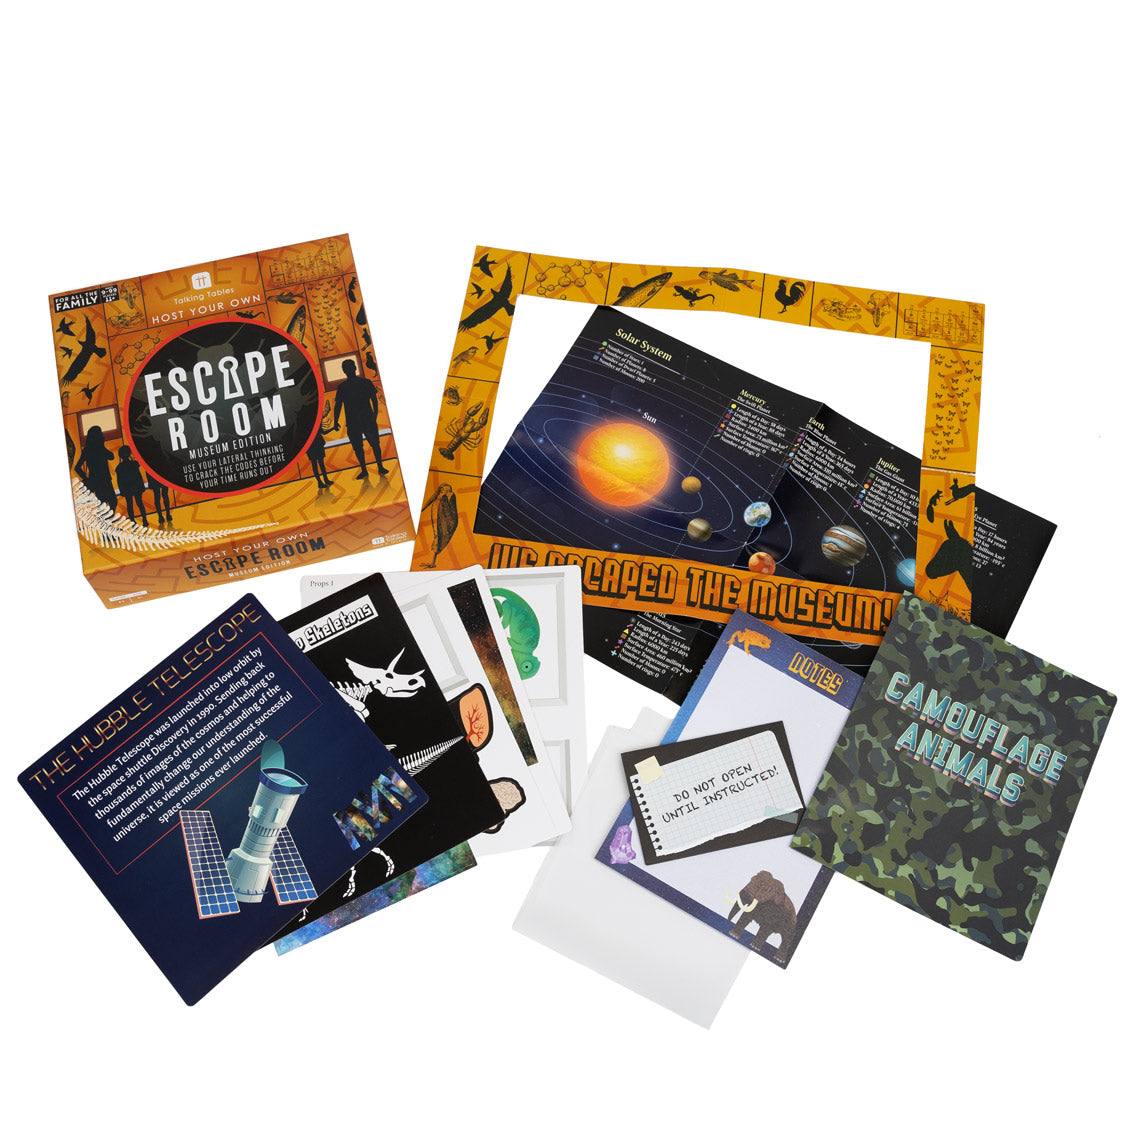 An image of the contents of the Escape Room Museum Edition game box.